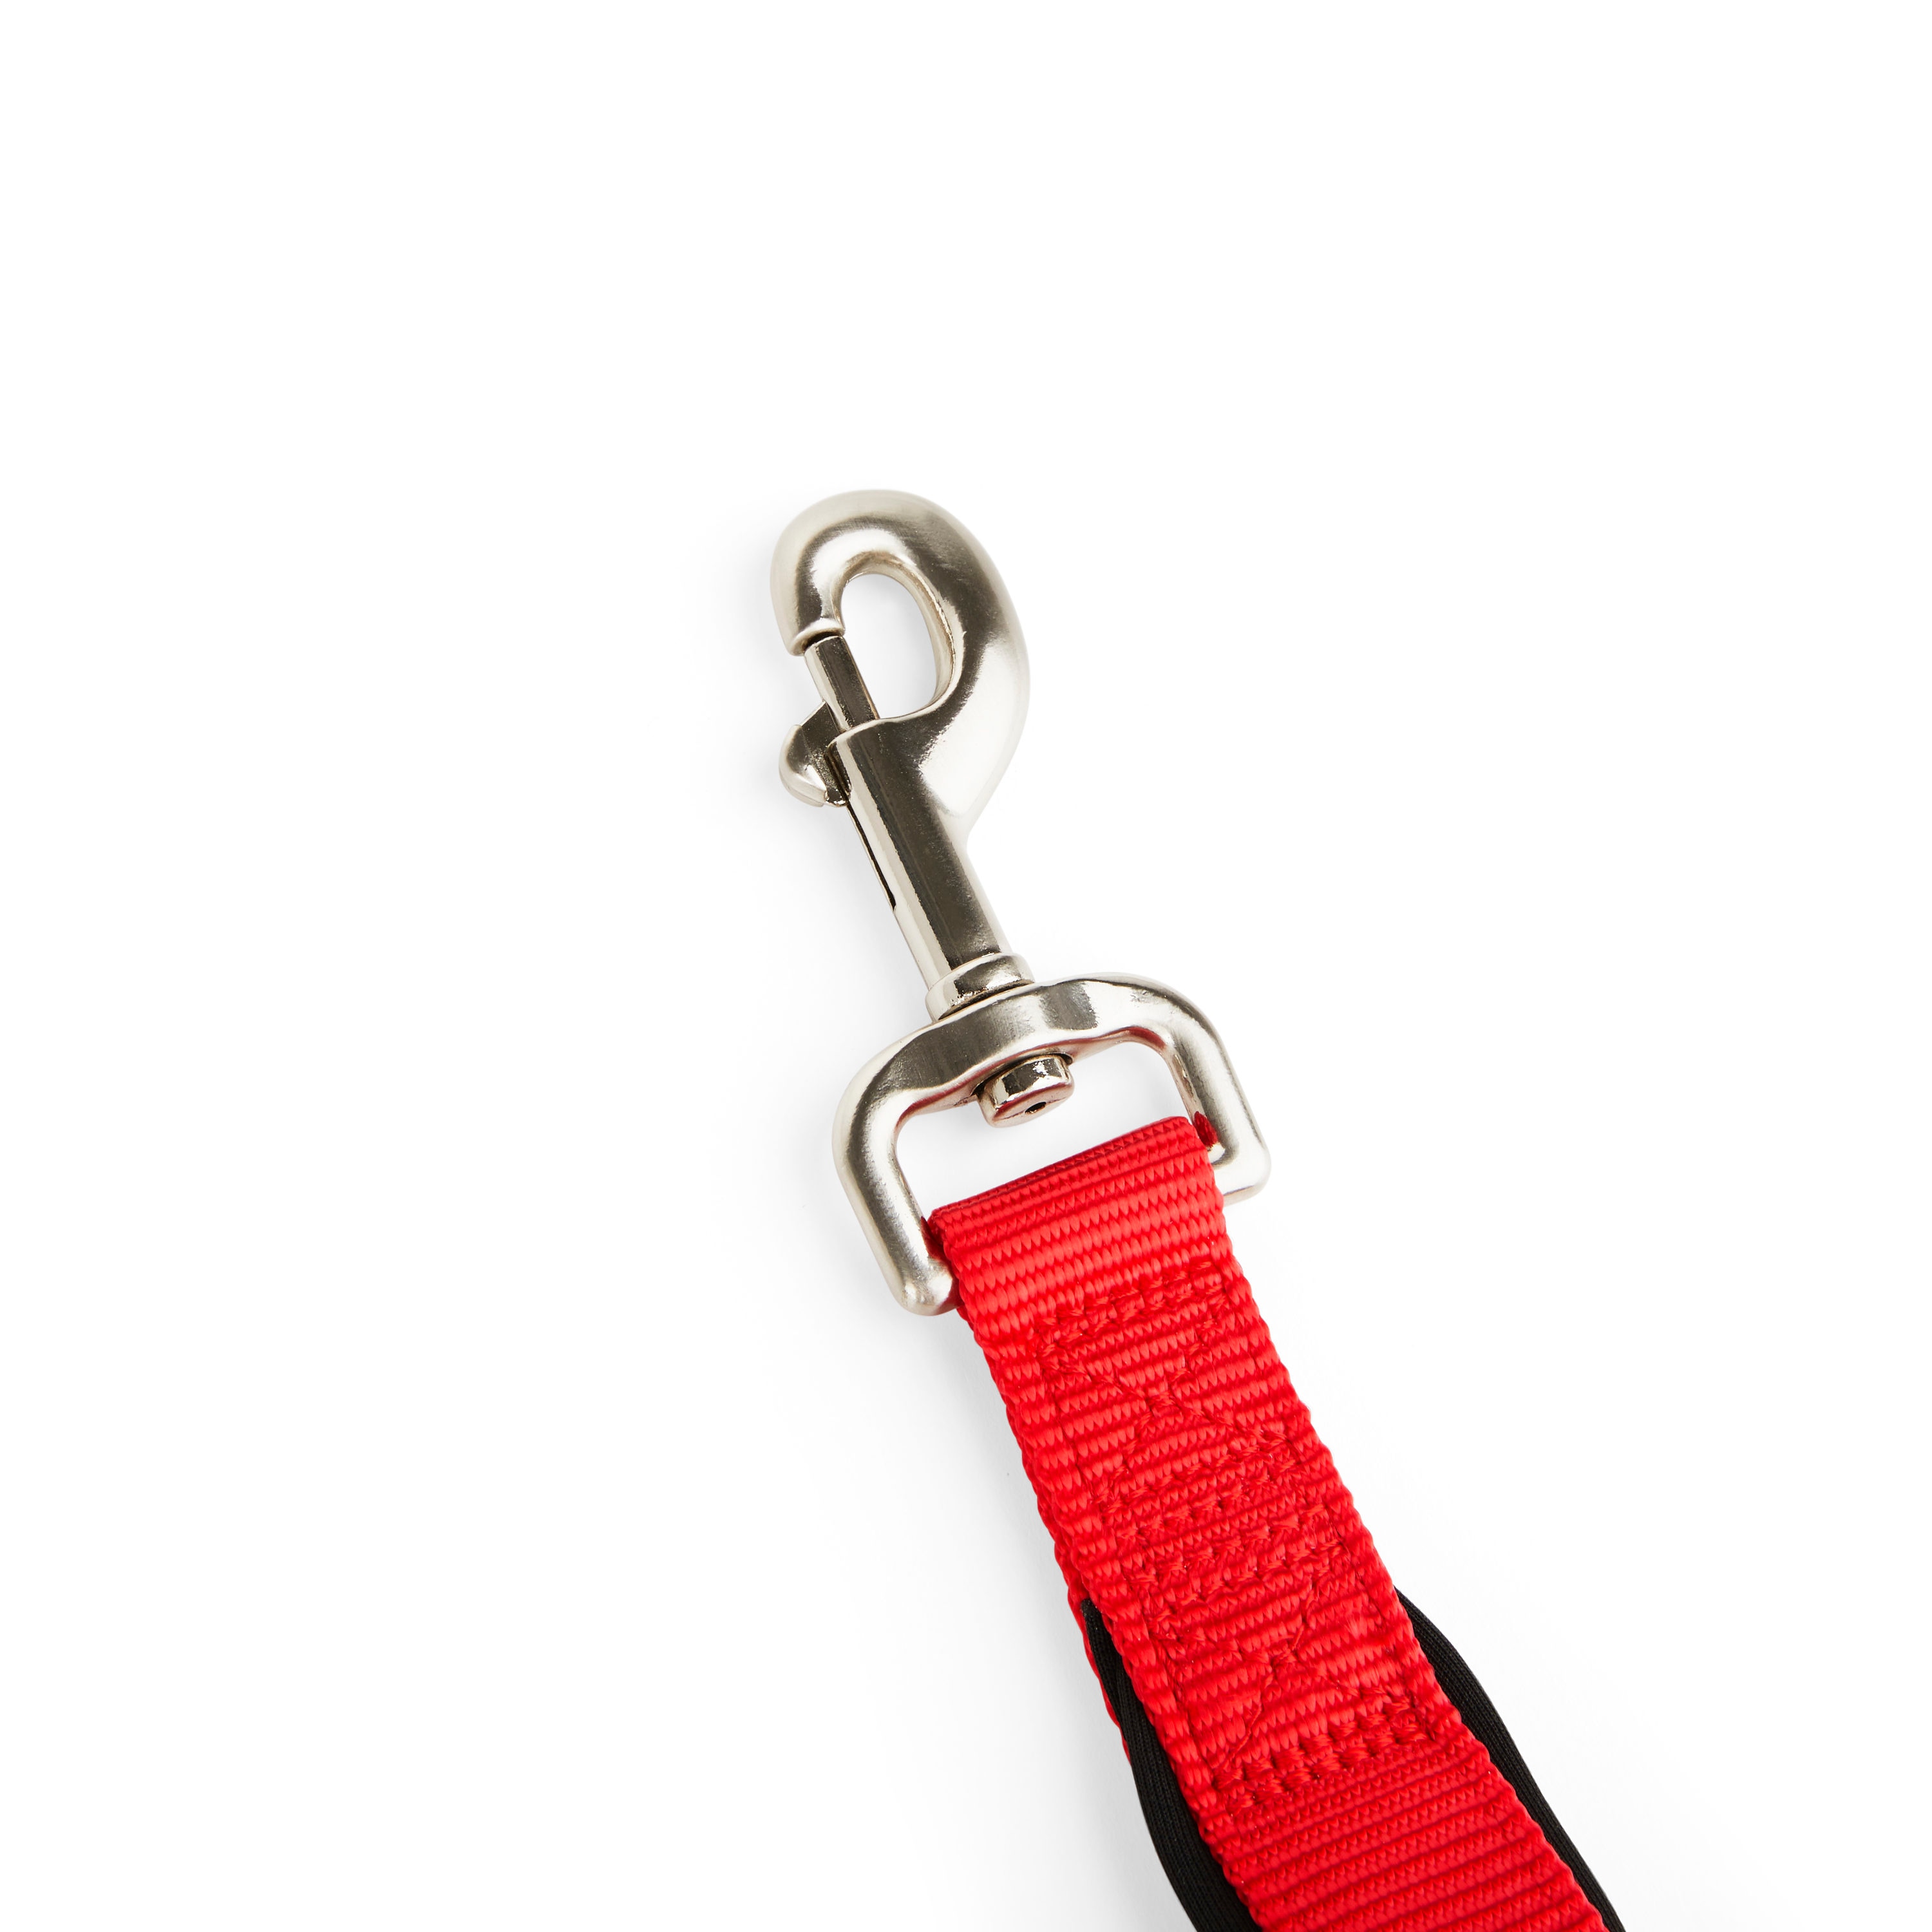 Good 2 Go Good2Go Red 2-in-1 Dog Leash, 6 ft. - Polyester/Nylon, Standard &  Traffic Handles, Neoprene Lining - Ideal for Any Size Dog in the Pet Leashes  department at